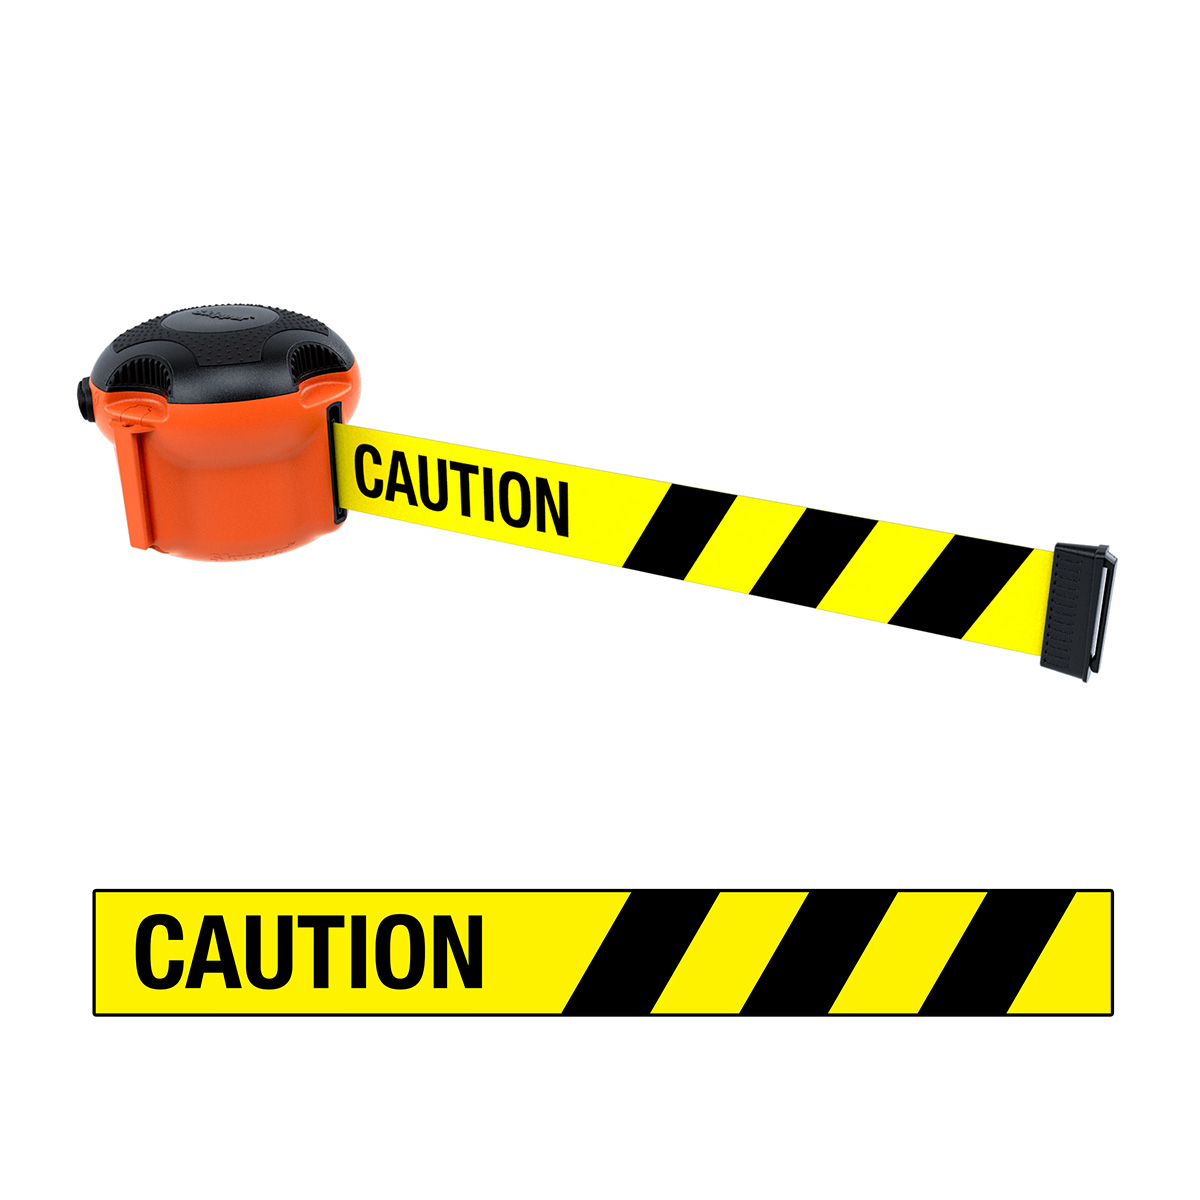 Skipper XS Retractable Belt Barrier In Orange With Black And Yellow Caution Message Barrier Tape